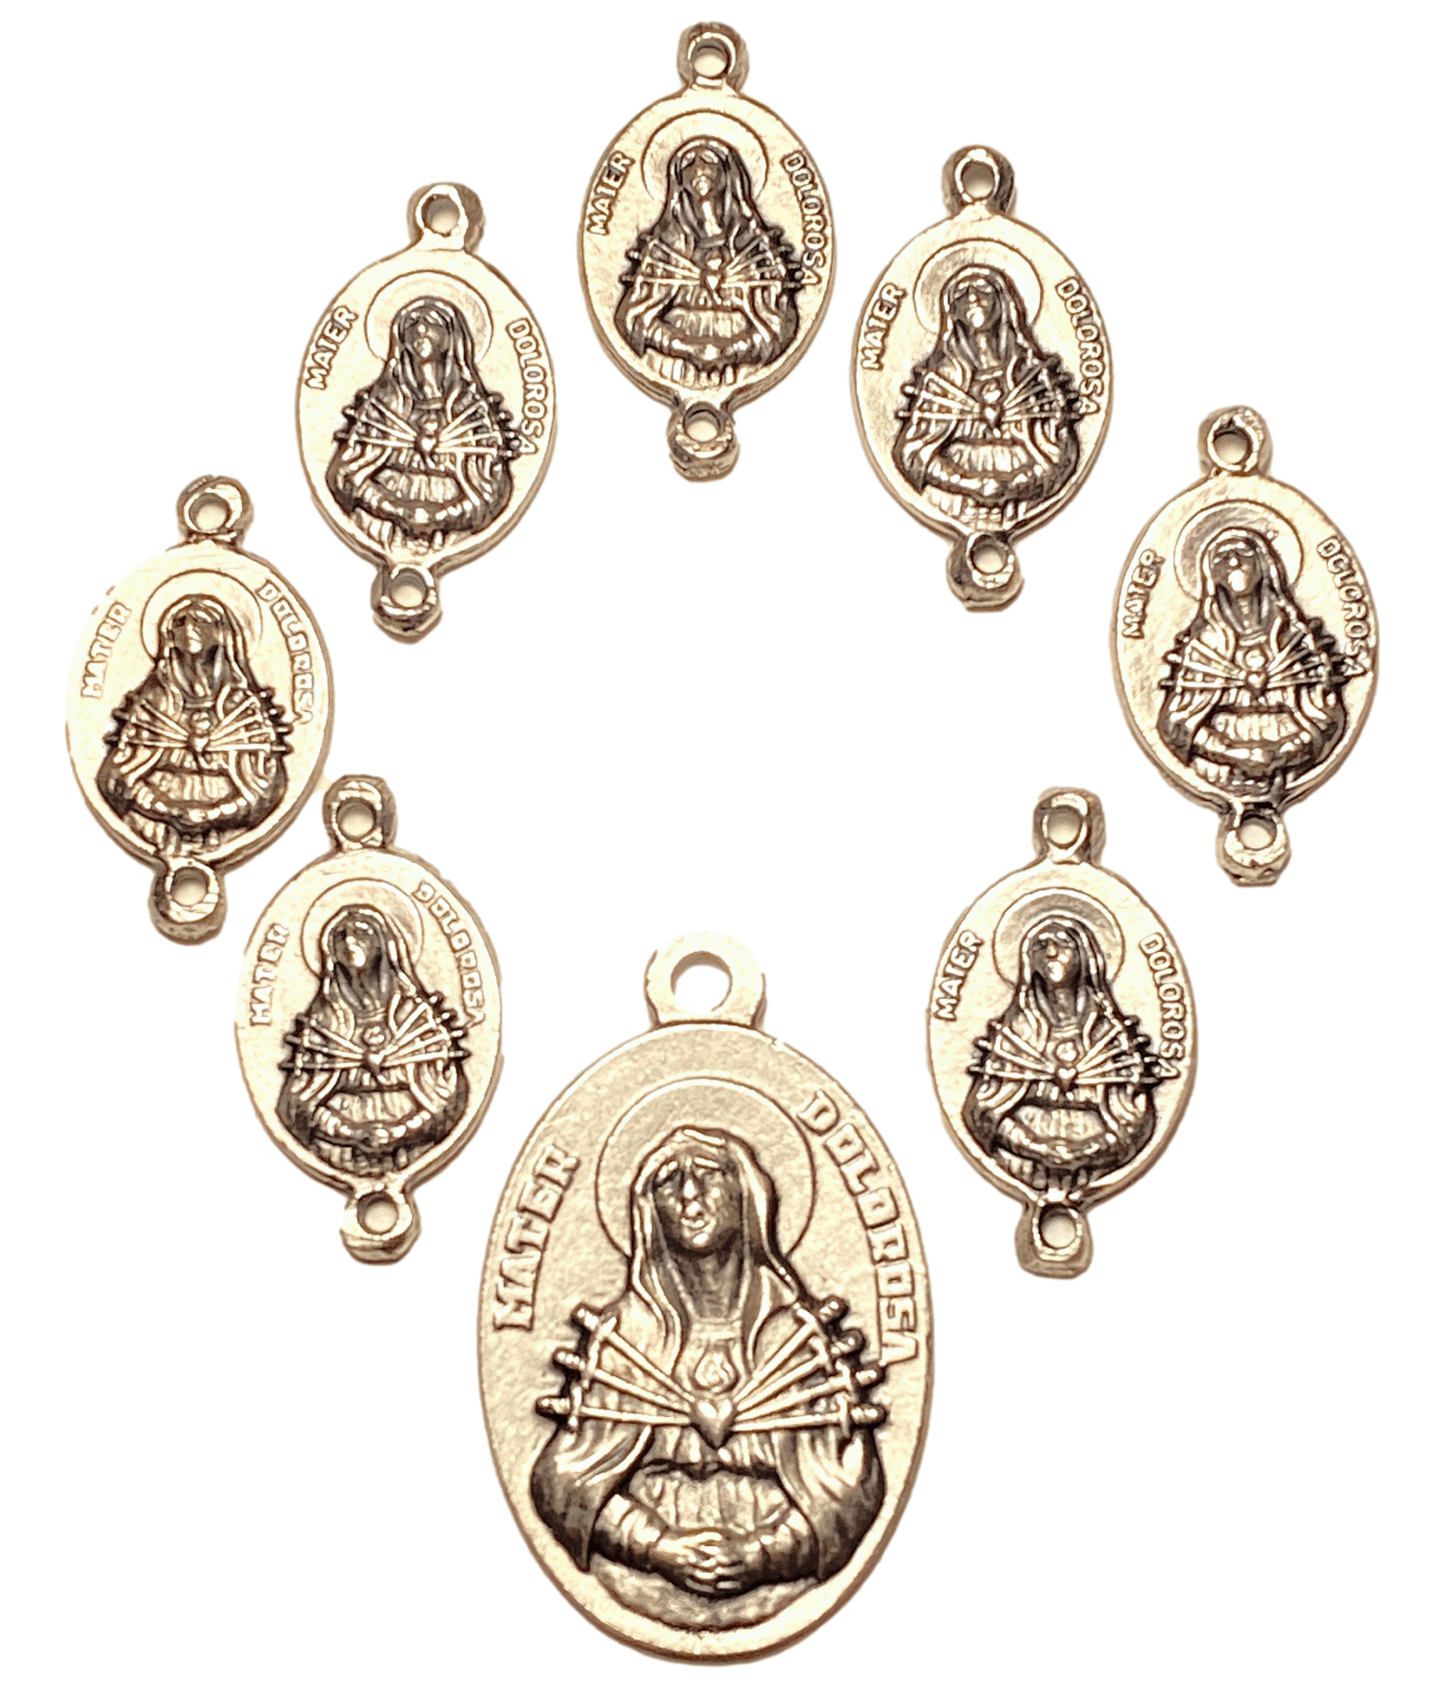 Rosary Parts Seven Sorrows Devotional Medals Set Package of 8 No Center Italian Silver Oxidized Metal Alloy - Ysleta Mission Gift Shop- VOTED El Paso's Best Gift Shop